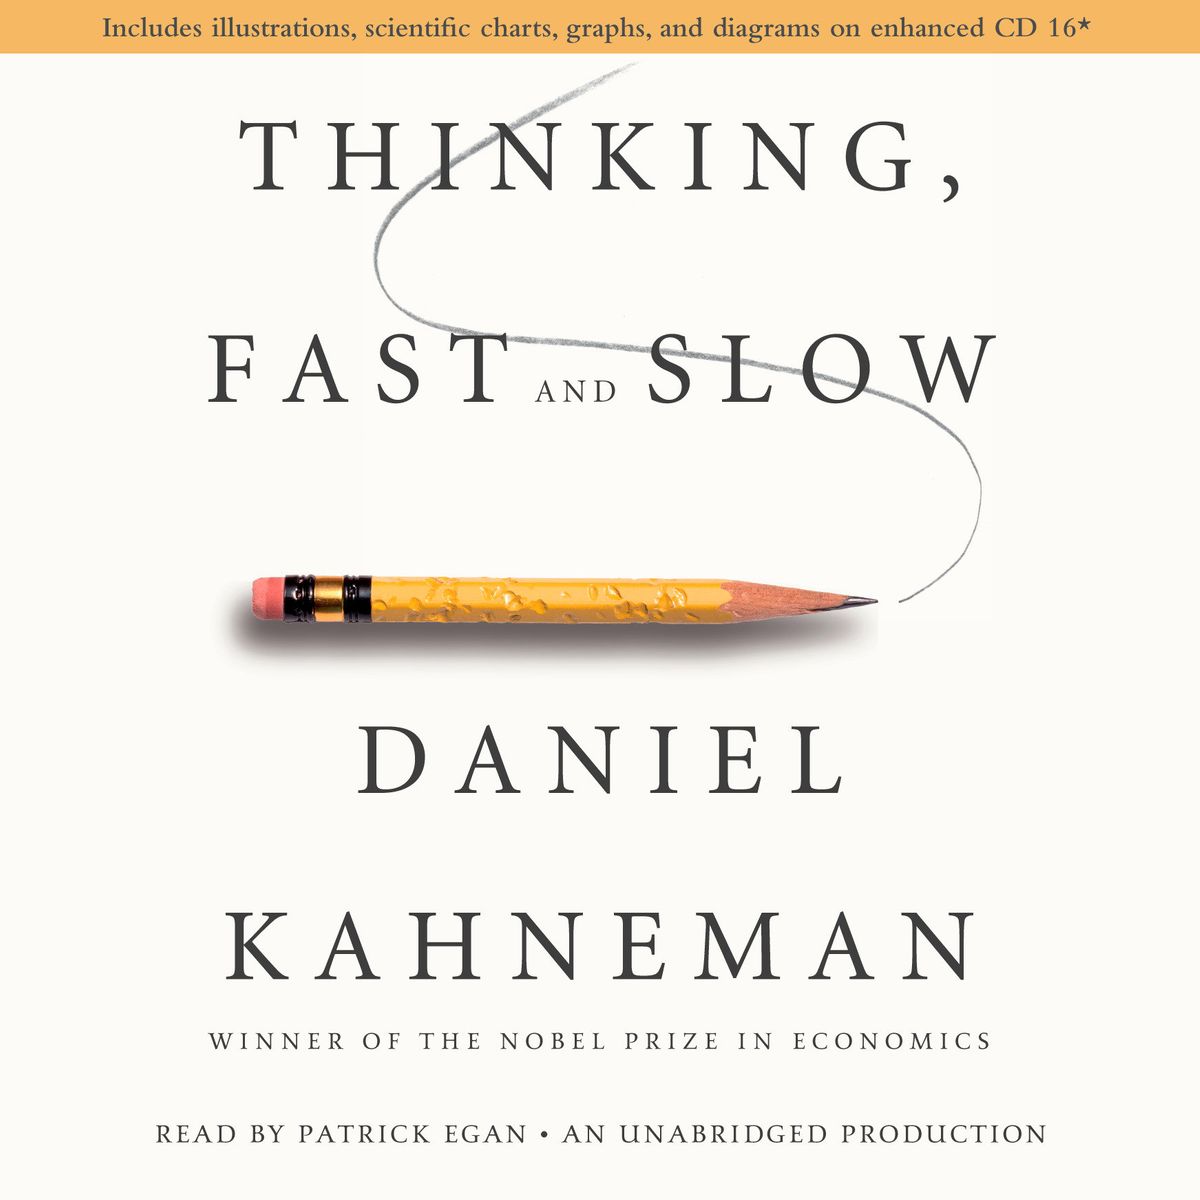 Cover image of Daniel Kahneman's 'Thinking, Fast and Slow'